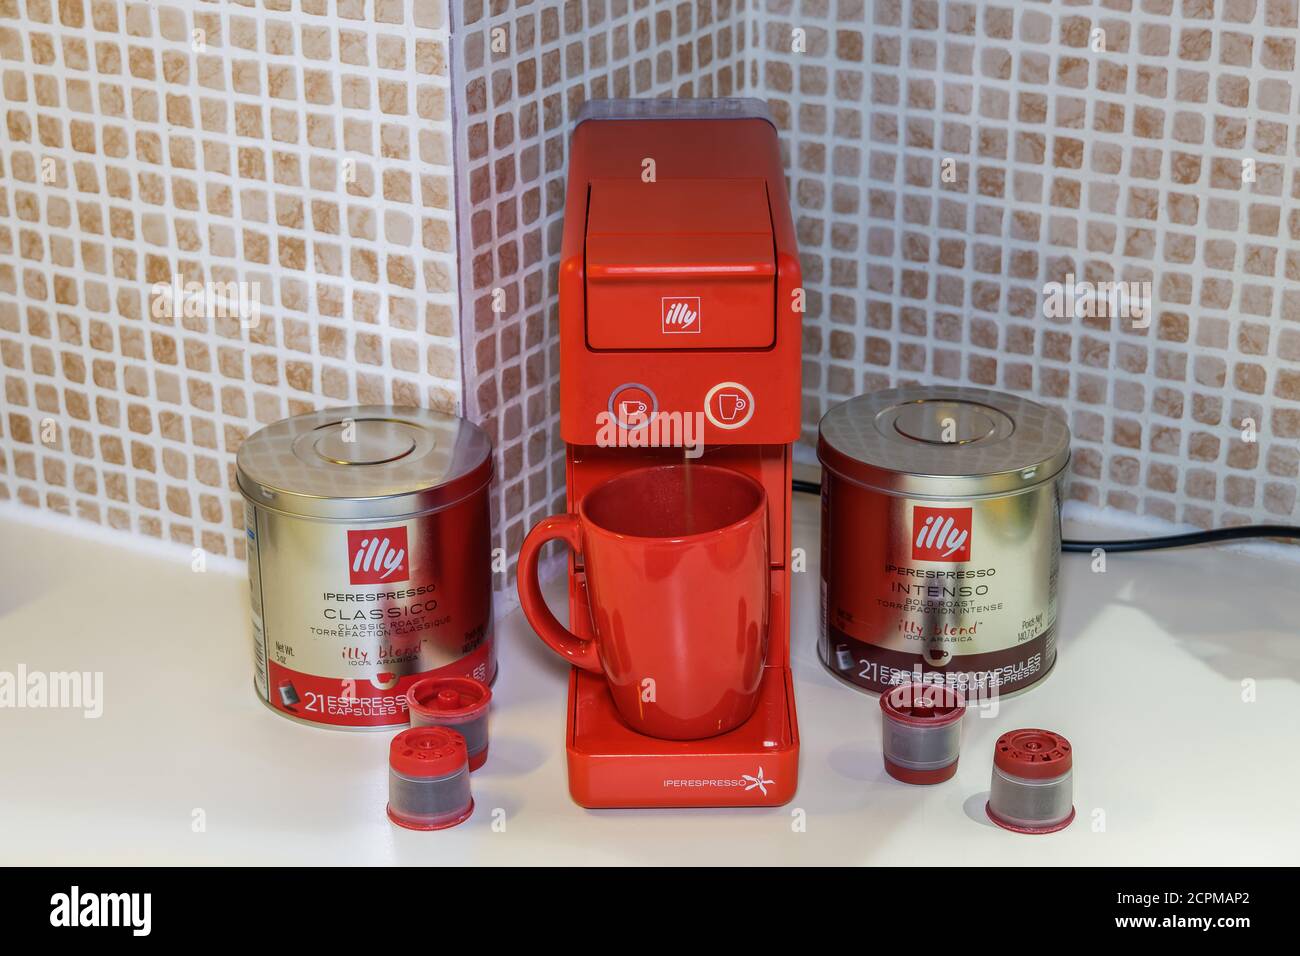 Automatic Illy iperespresso machine to create espresso with single-serve capsules. Pods with case and Illy logo around red electric coffeemaker. Stock Photo